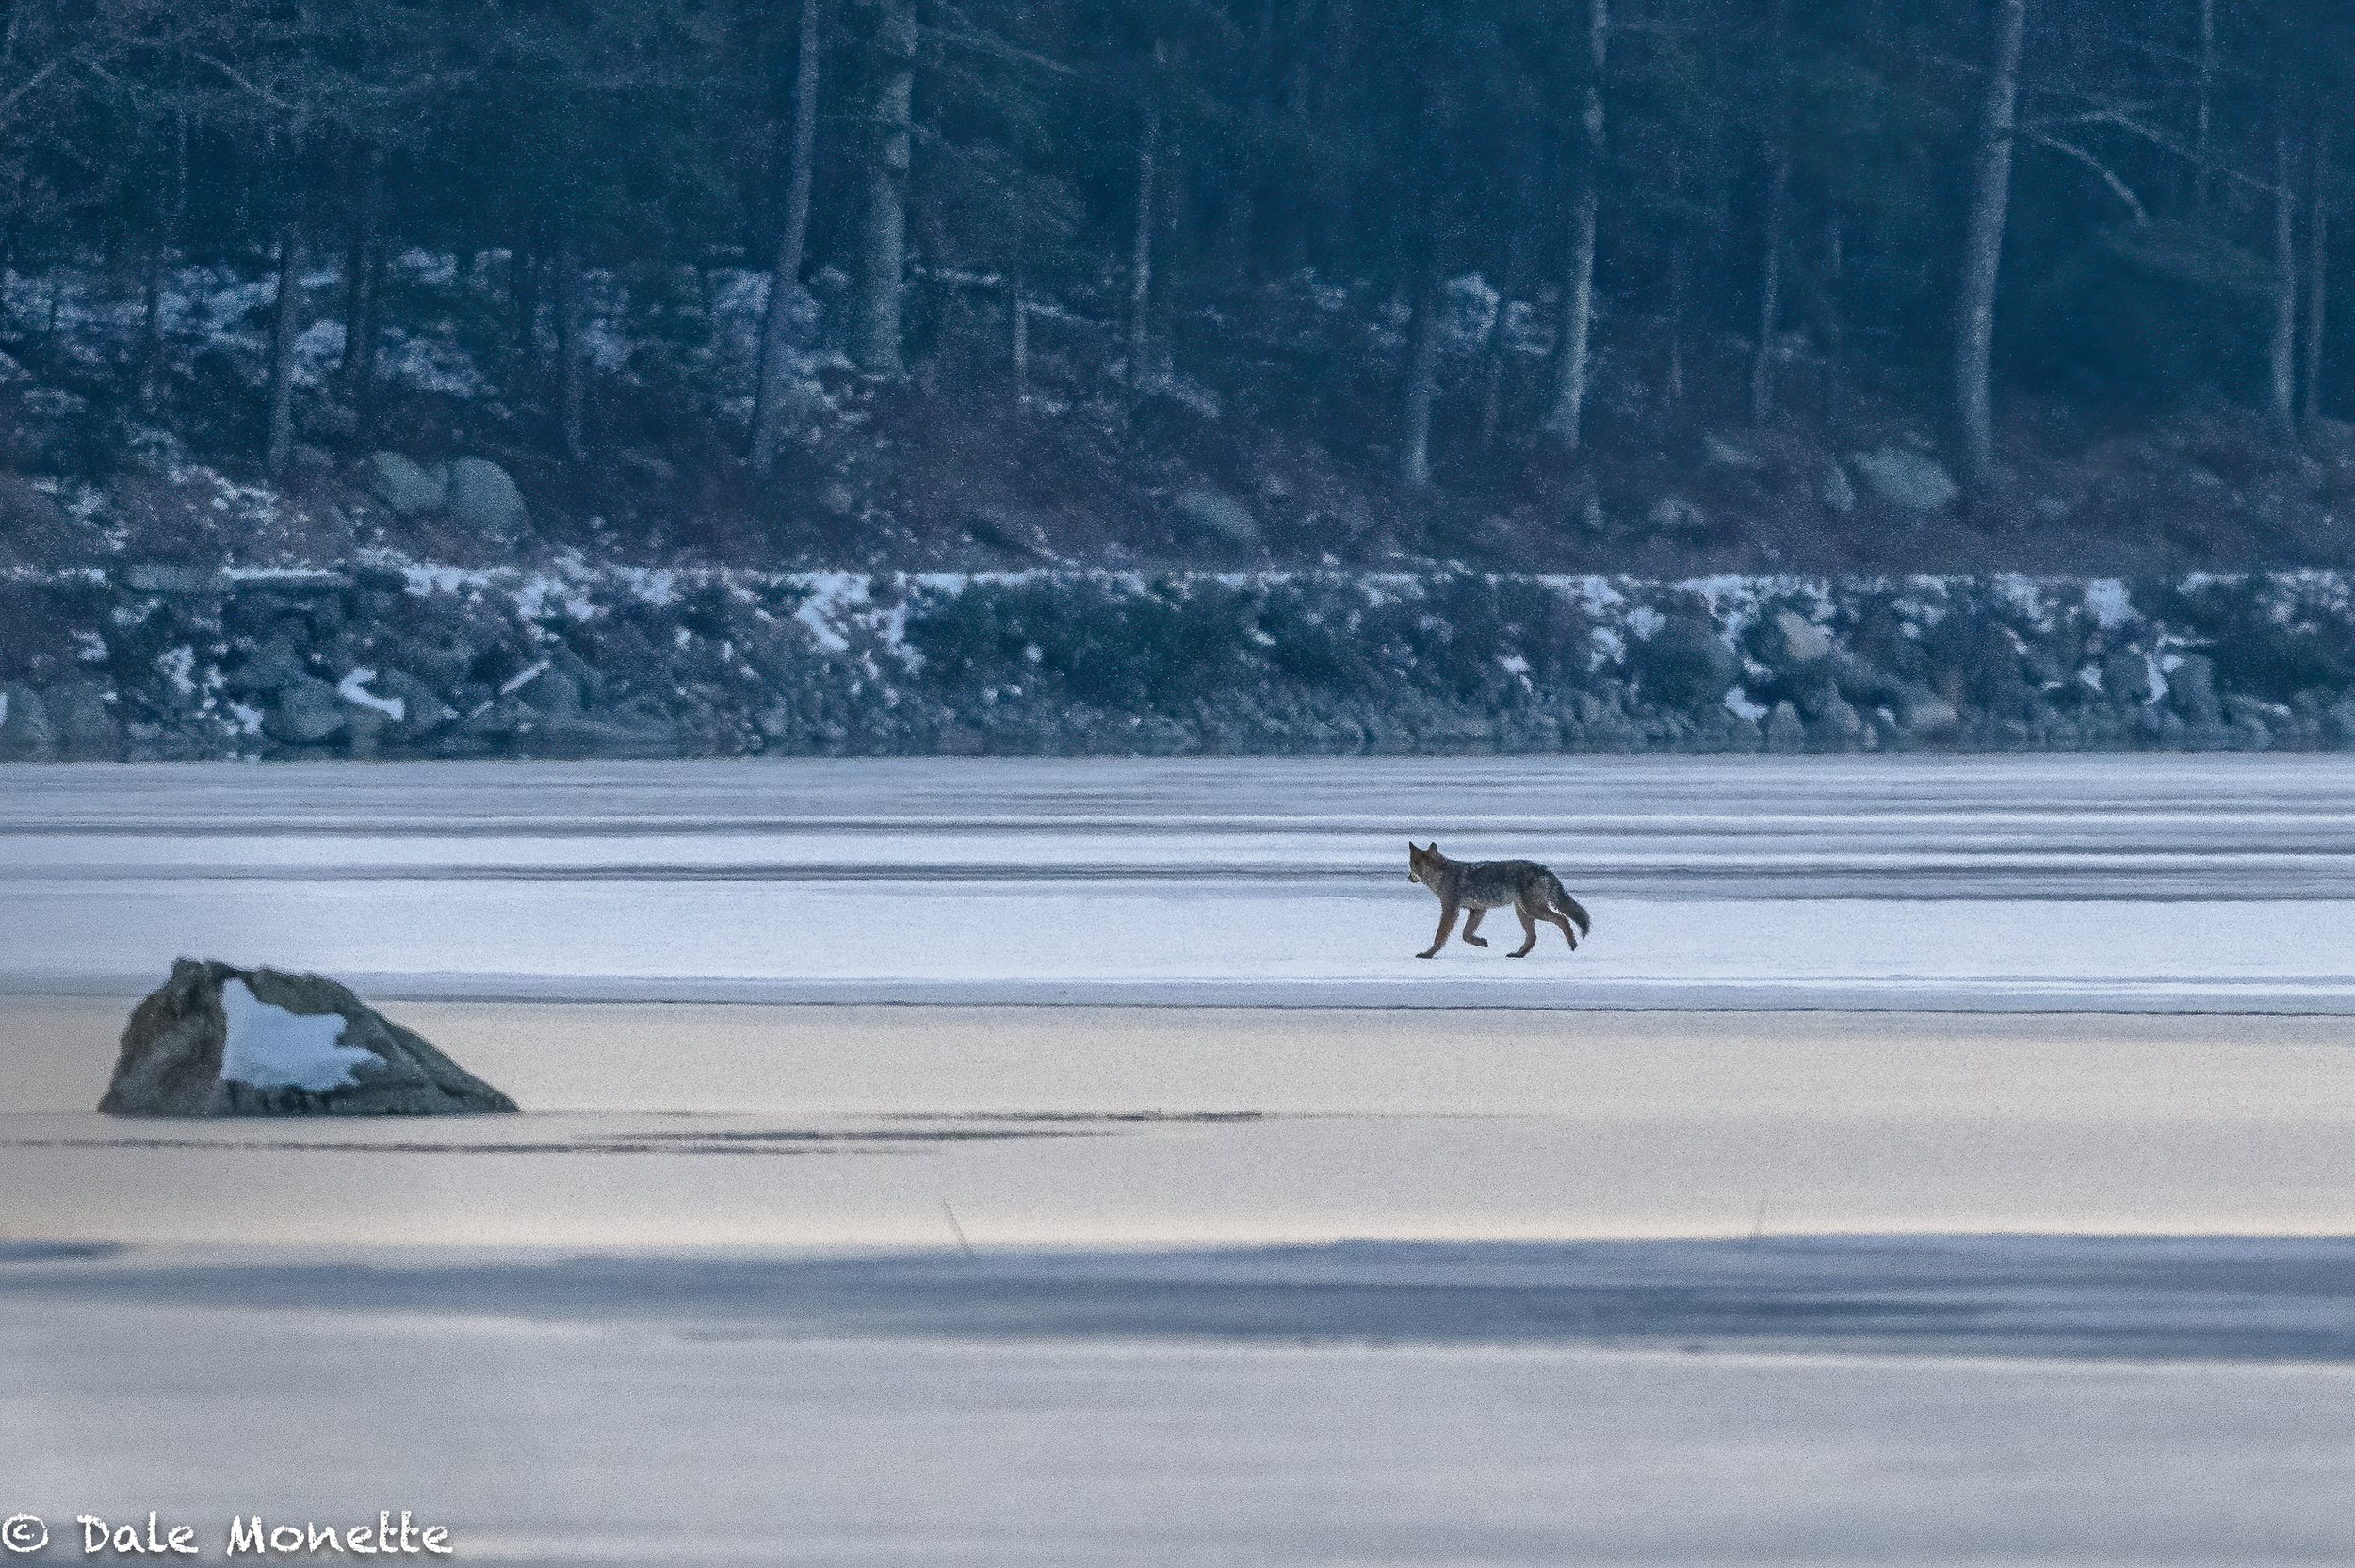   The last of the Quabbin ice this year.  I found this eastern coyote running along early in the morning a few days ago. Probably the last ice he will be able to cross until next winter.  